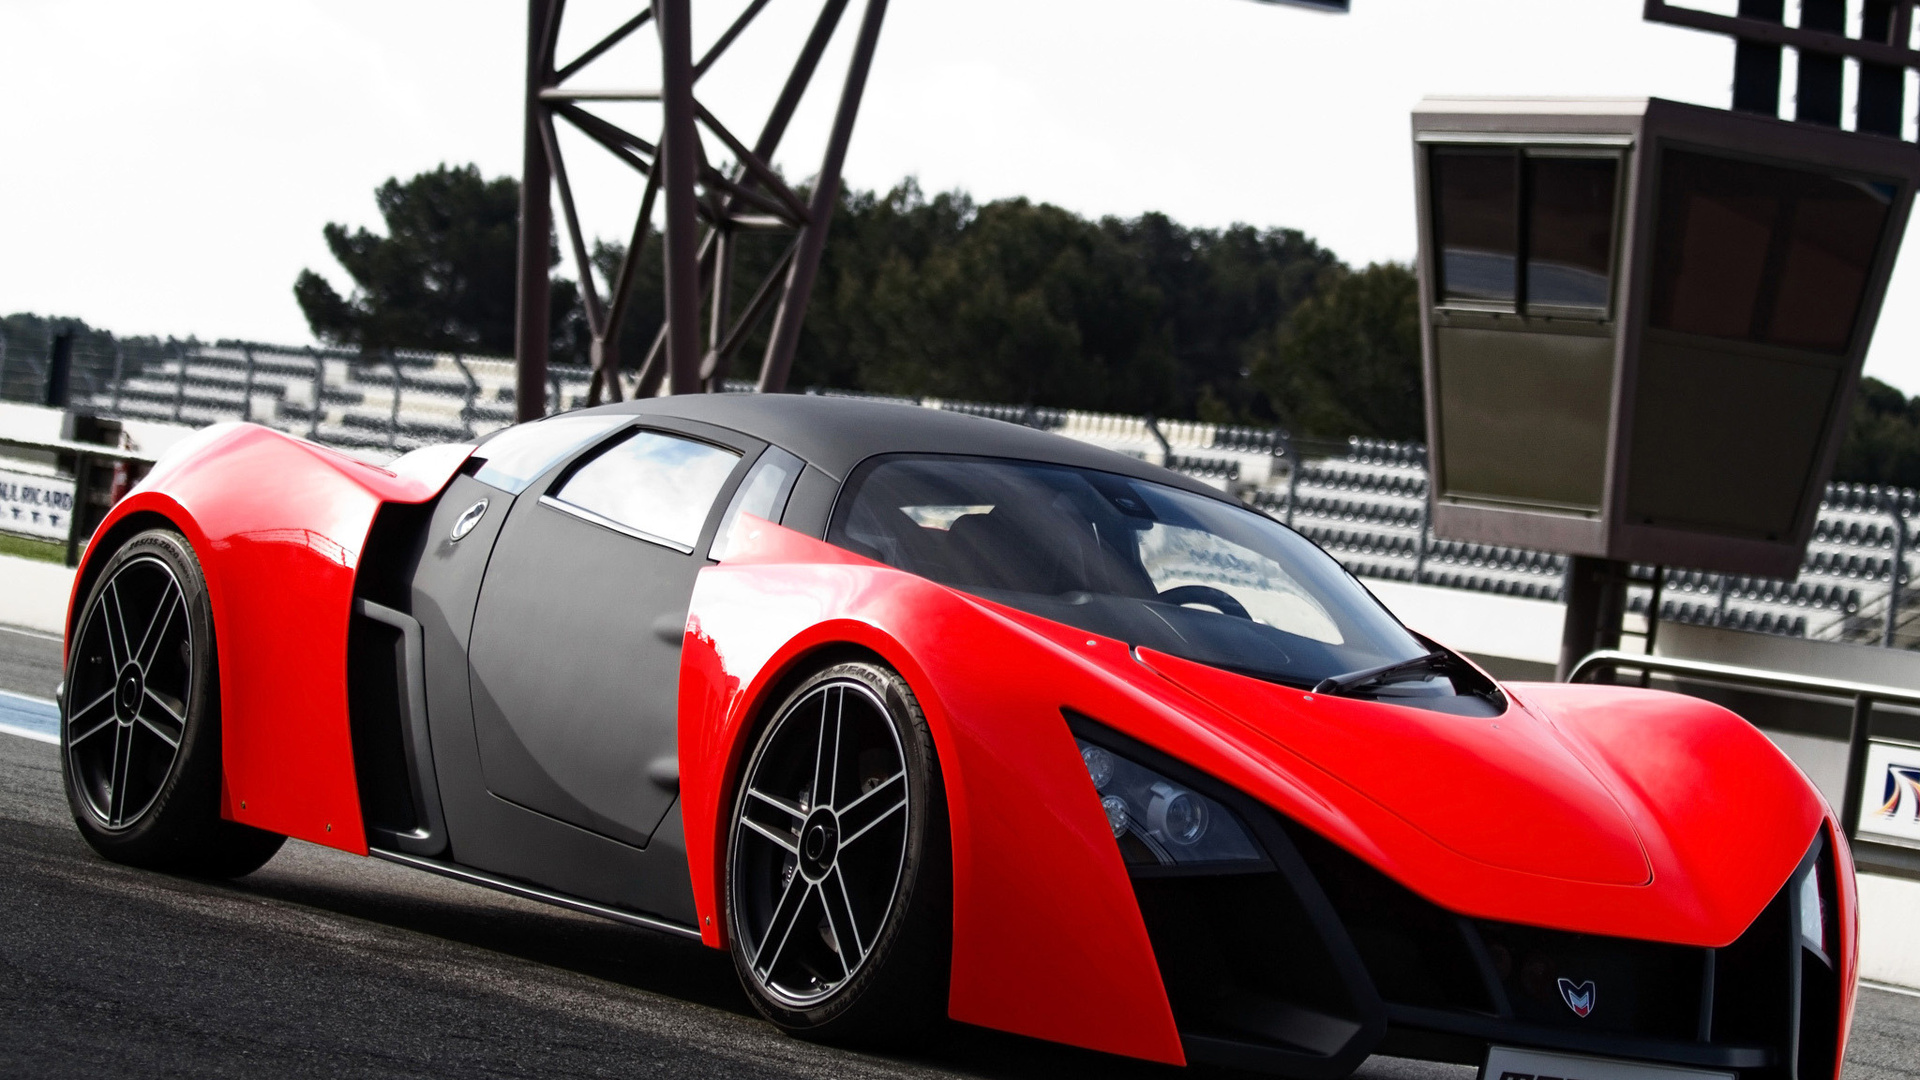 Marussia Wallpapers